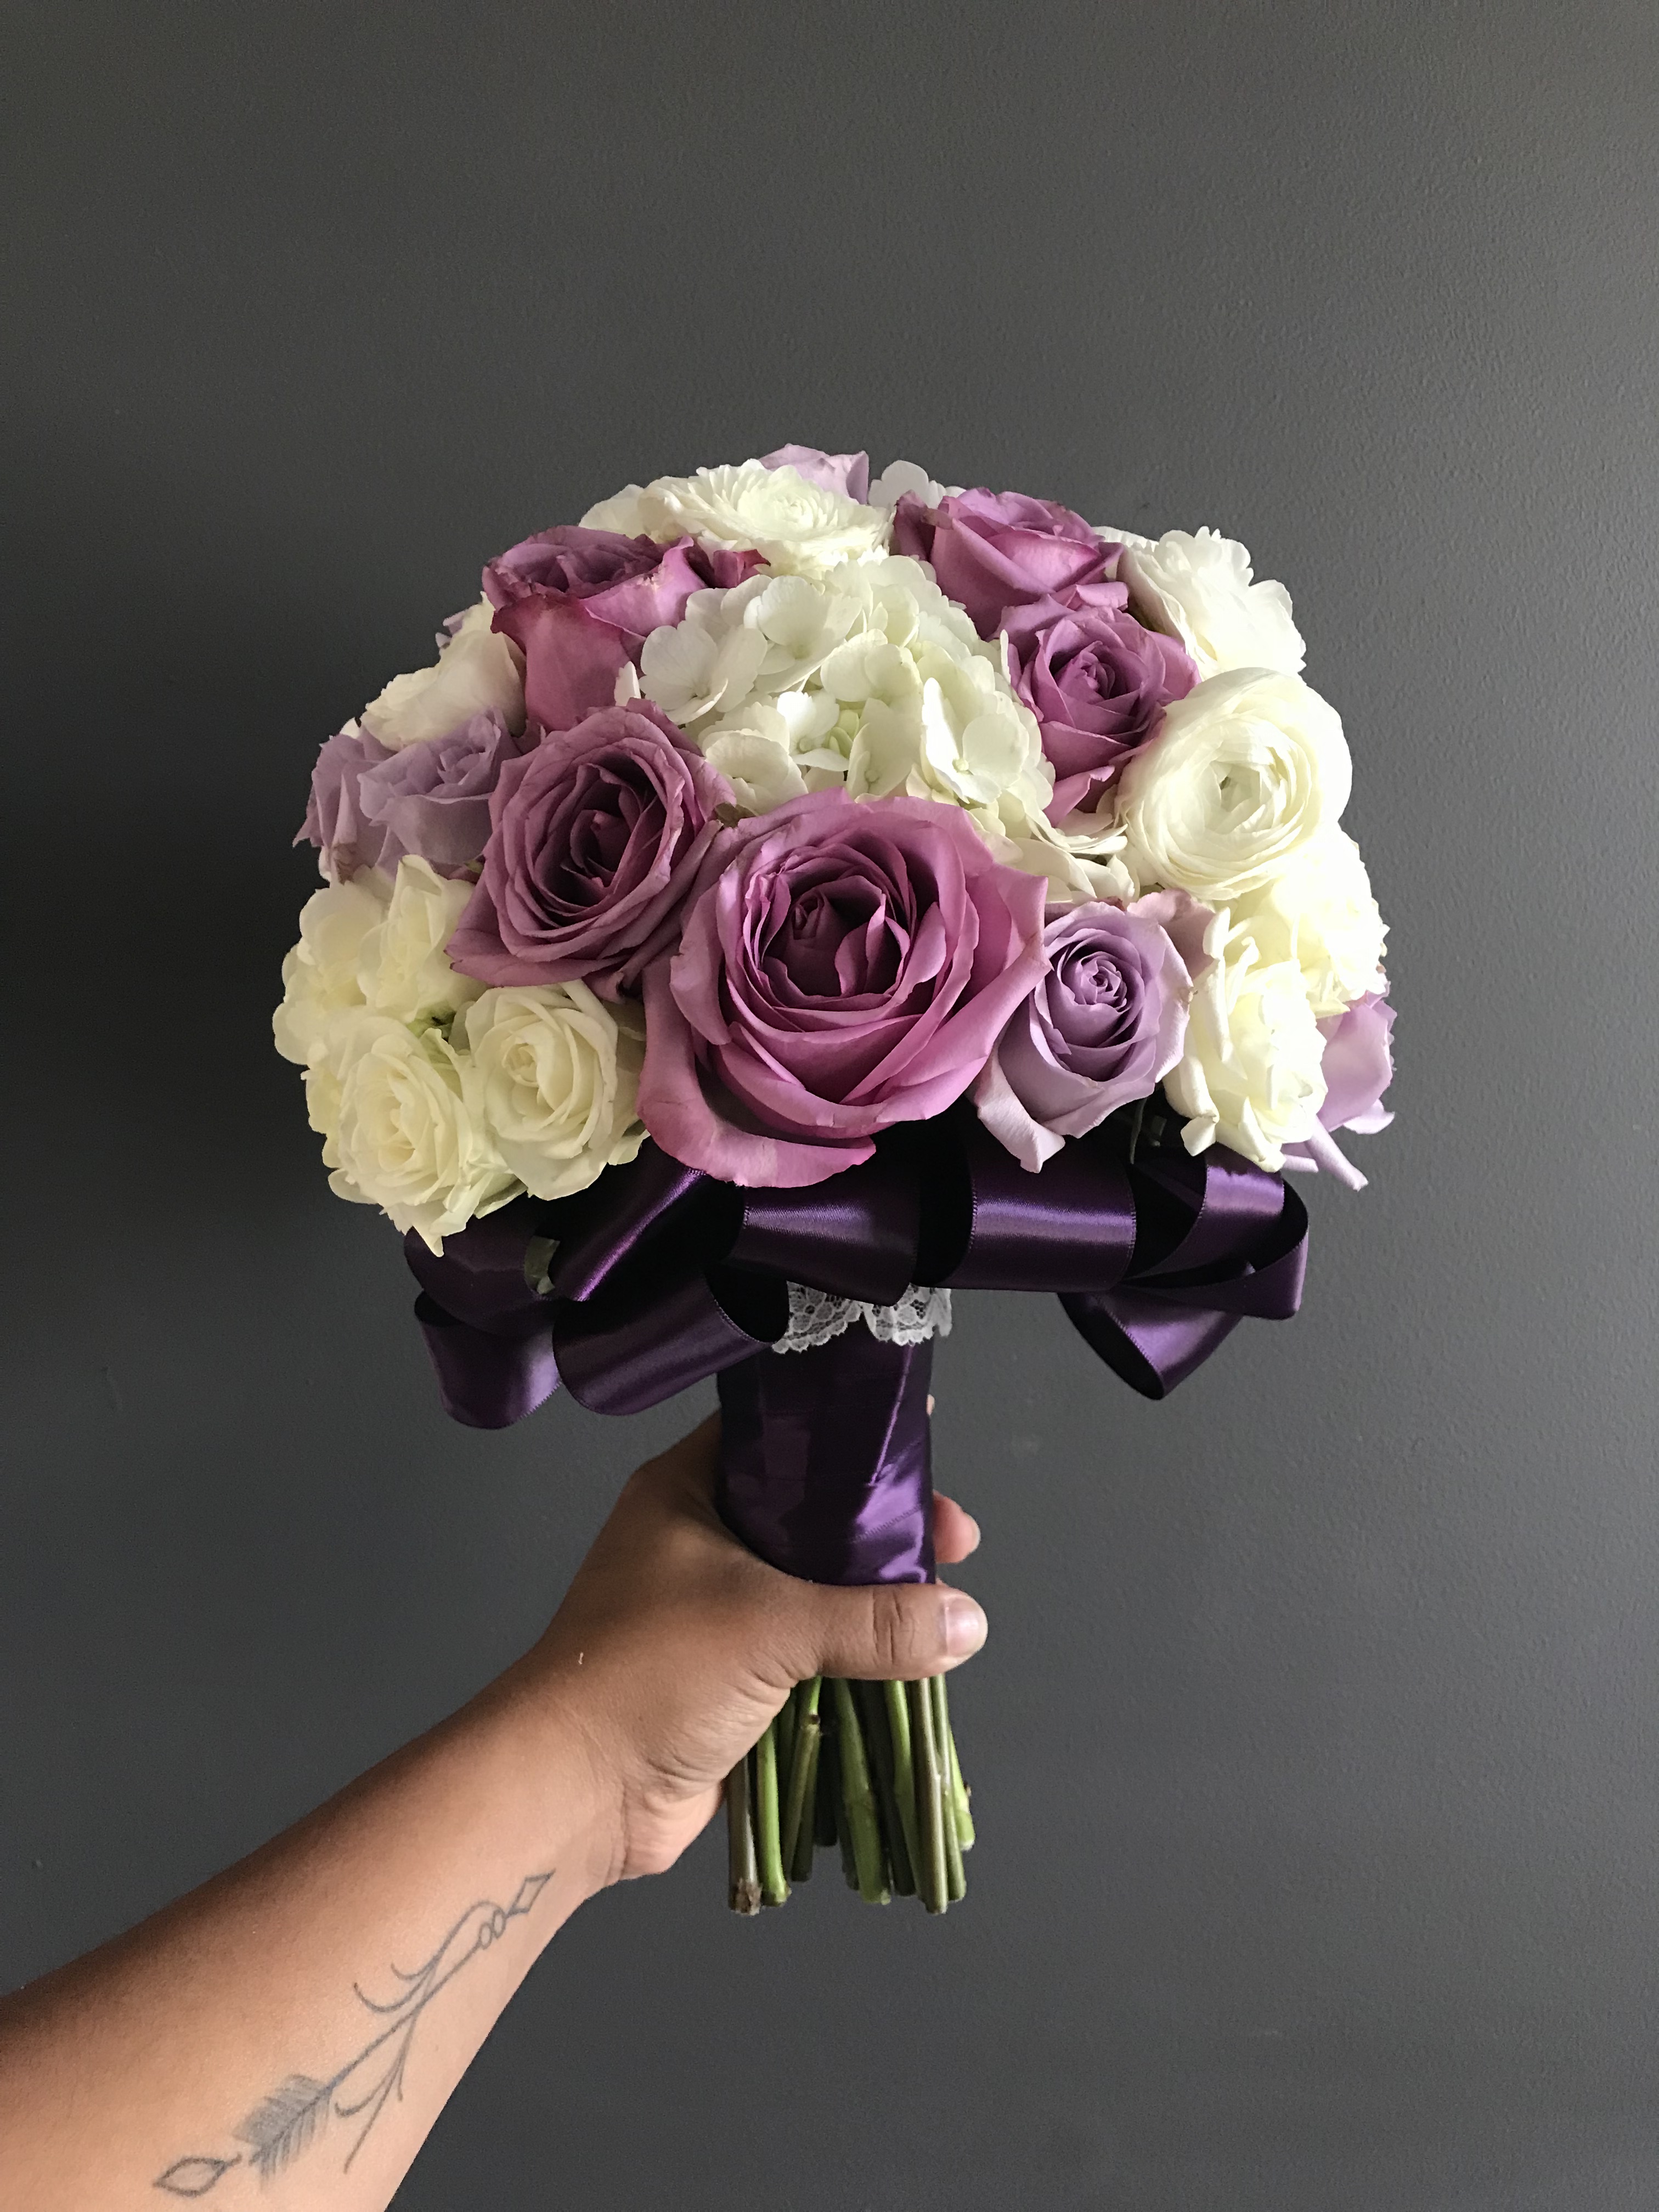 Bridal bouquet with lavender roses, white hydrangea, white ranunculus and white spray roses embellished with purple satin ribbon